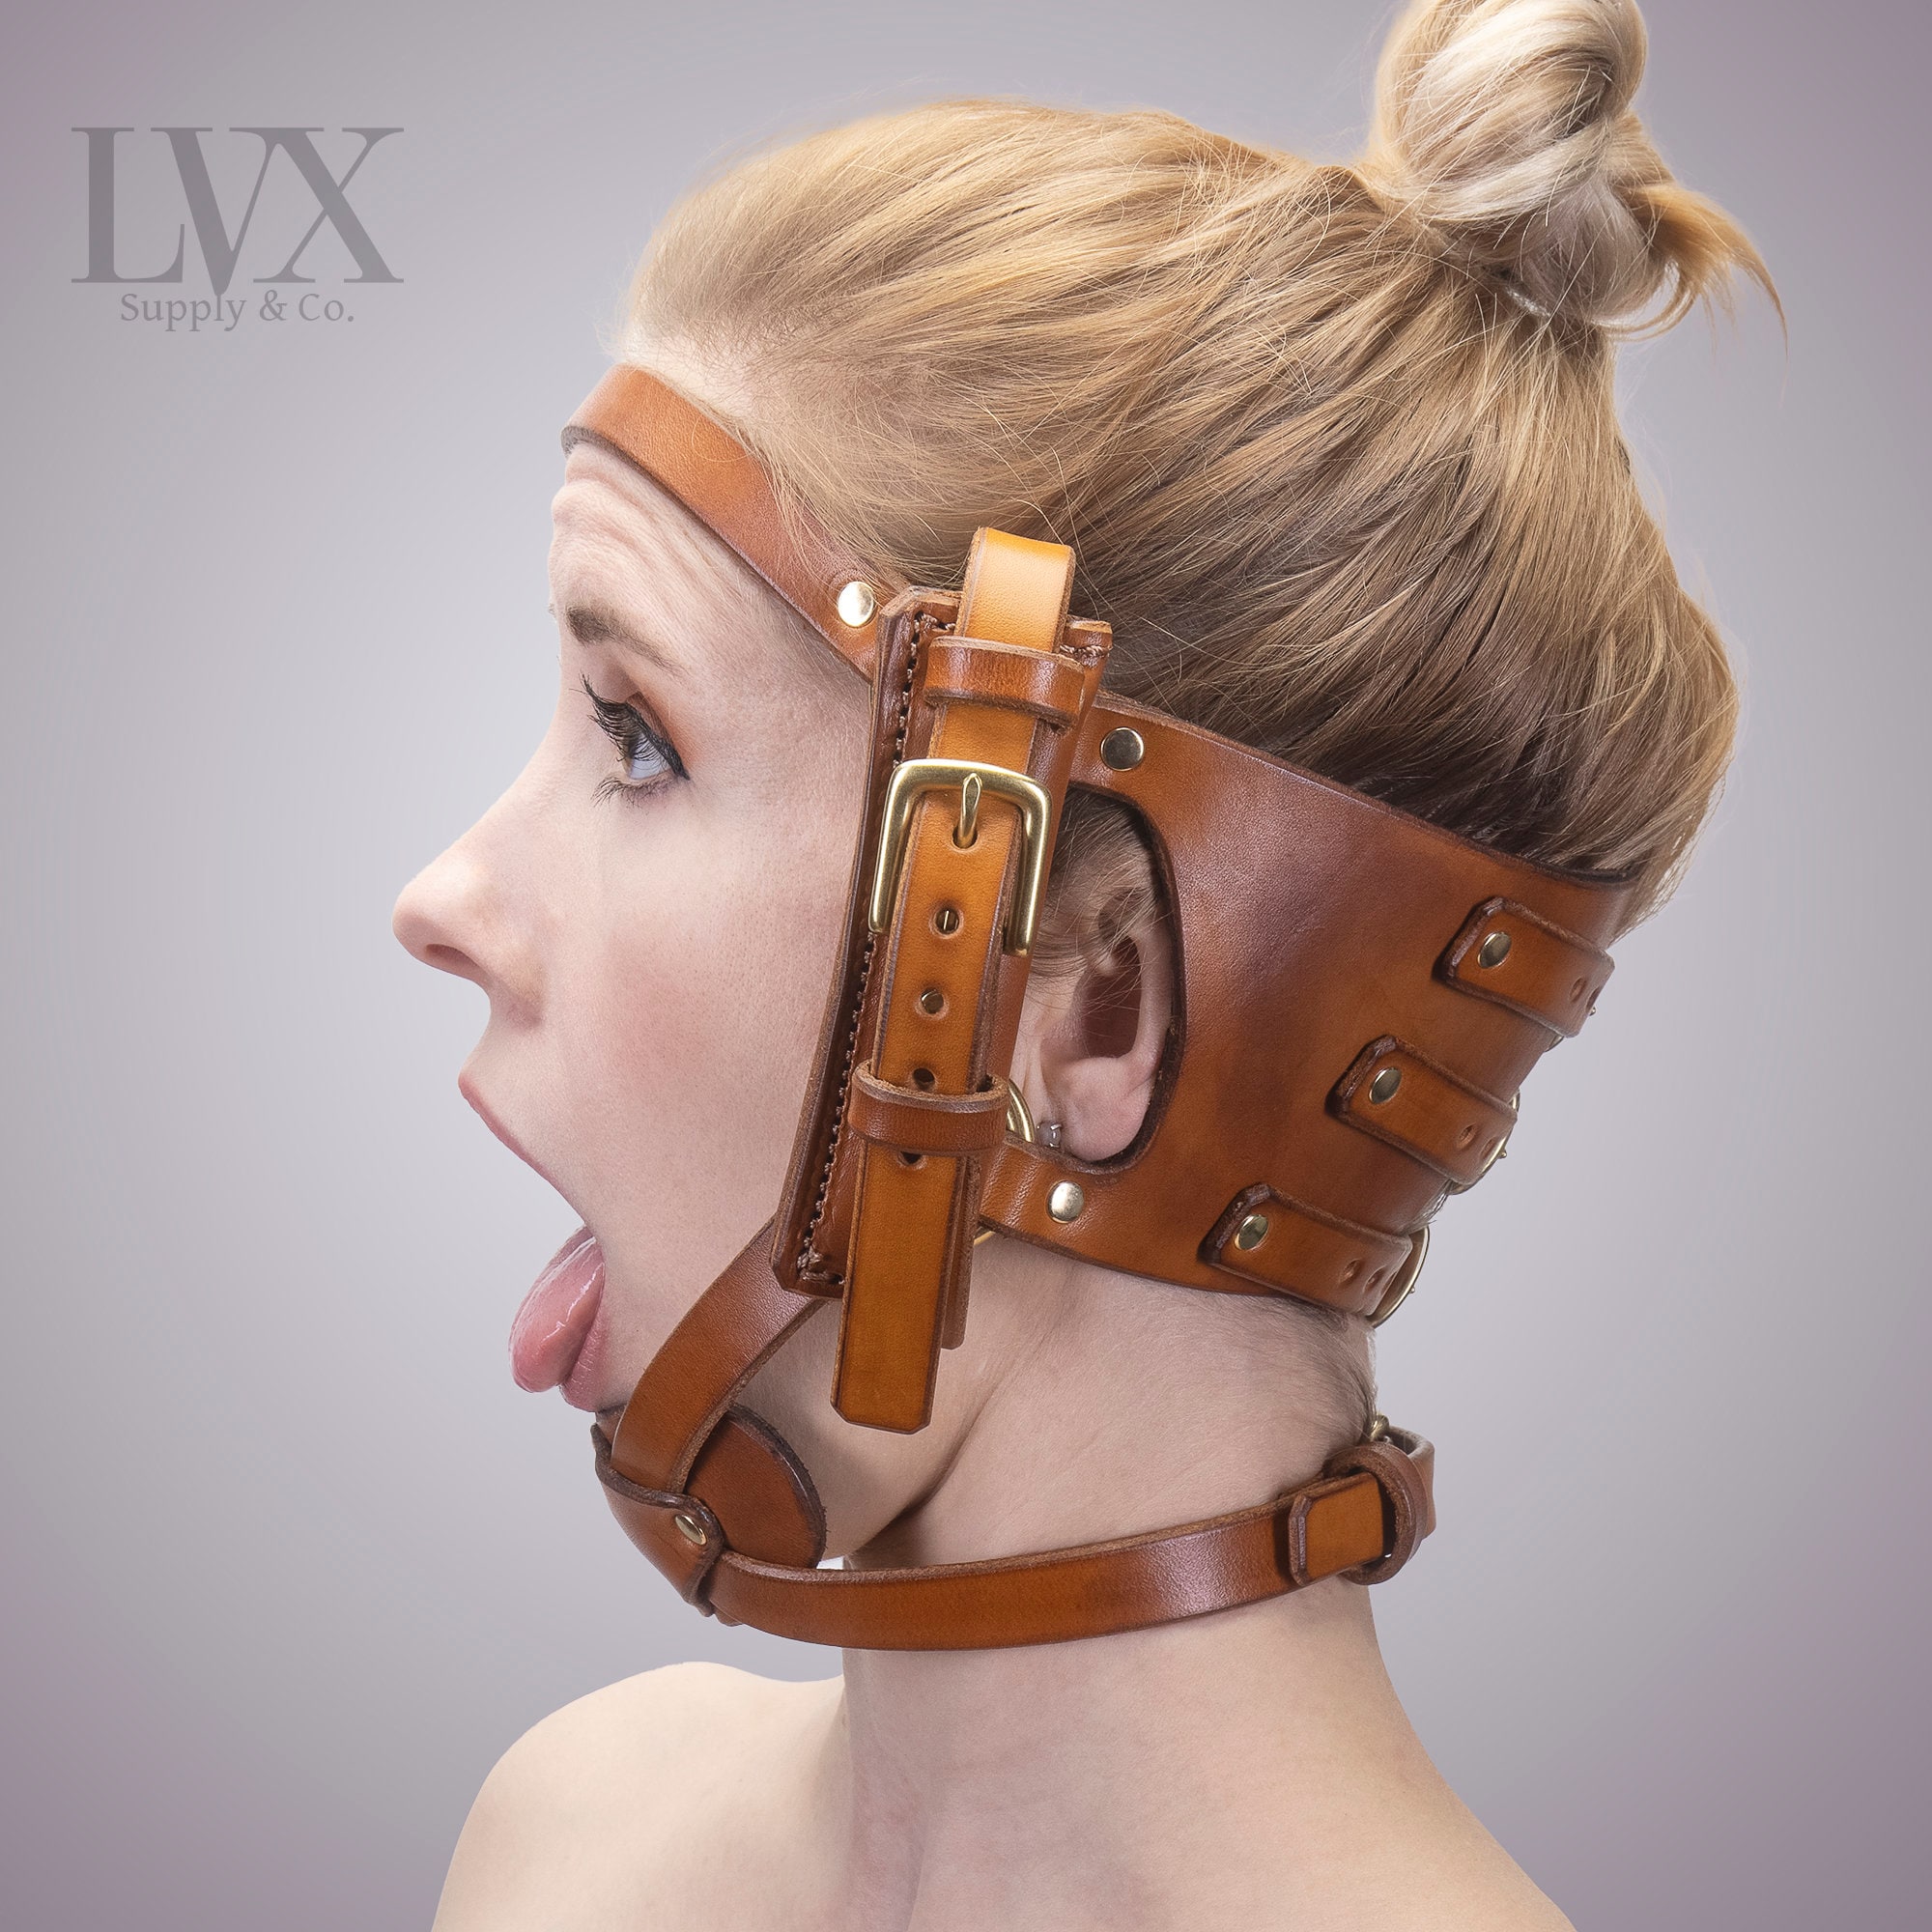 Face F*ck Harness | BDSM Head Harness | Leather Bondage Harness BDsM Harness Submissive Slave Toys bdsm-gear | Handmade by LVX Supply photo